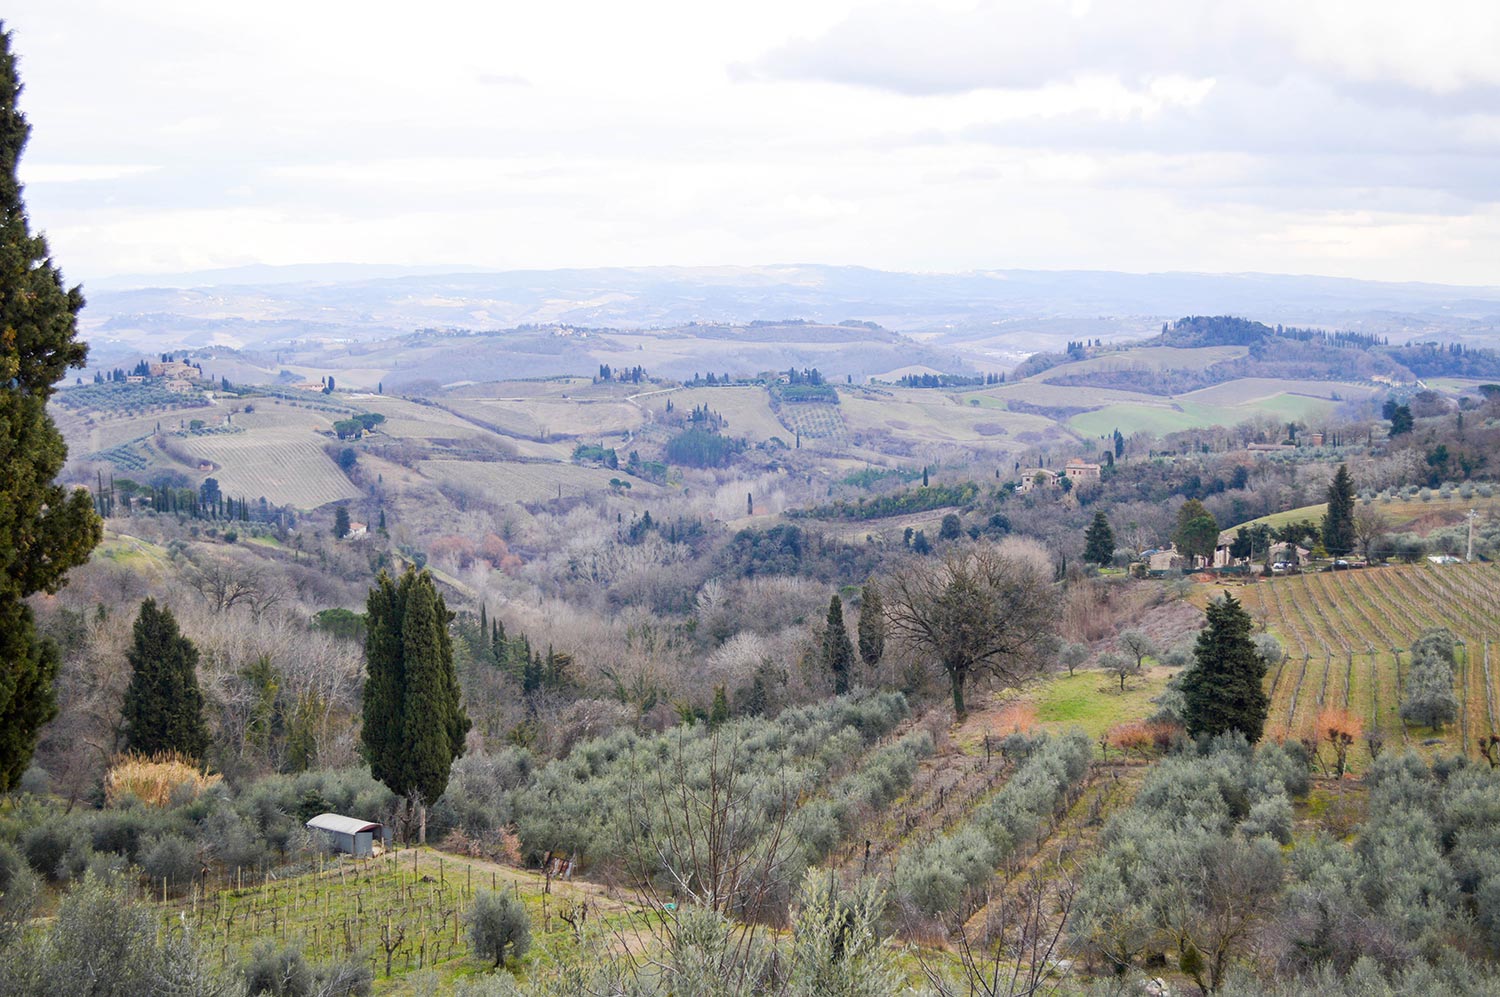 Traveling through Tuscany has become increasingly popular for modern romantics, whether it’s for honeymooning or multi-day destination weddings. Having lived in multiple Italian cities, we’re sharing our go-to spots for places to stay, restaurants to dine, activities to indulge in and other insider tips on the Willow & Oak journal with couples in mind. Read on to discover some of Italy’s best kept secrets and begin your Tuscan daydreams now! #destinationwedding #honeymoondestinations #tuscany